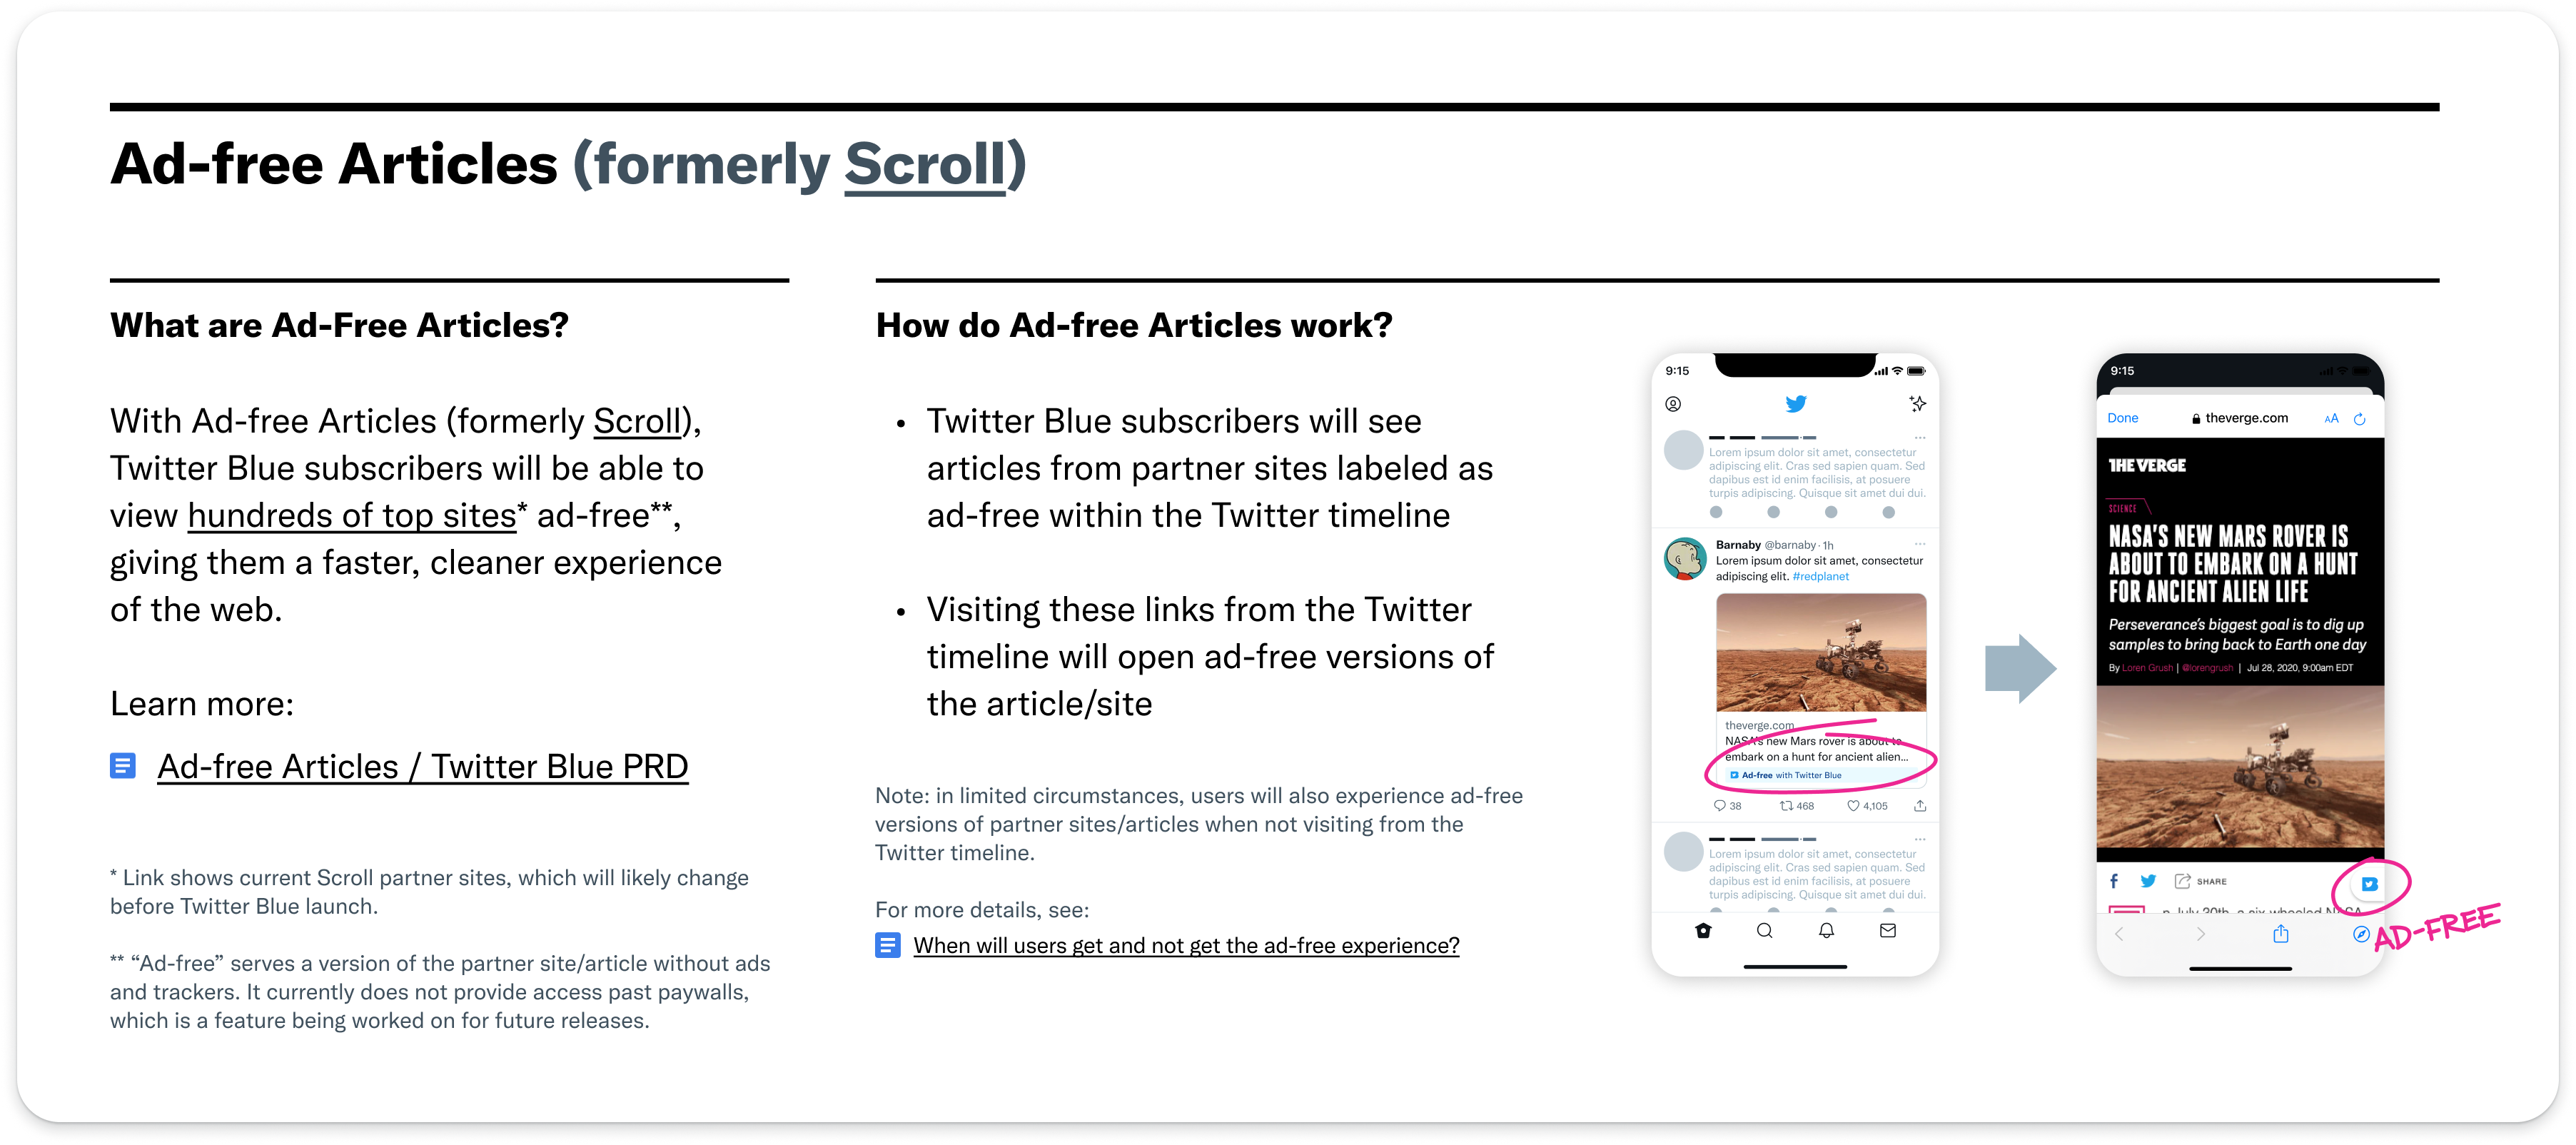 Twitter Ad-free Articles overview